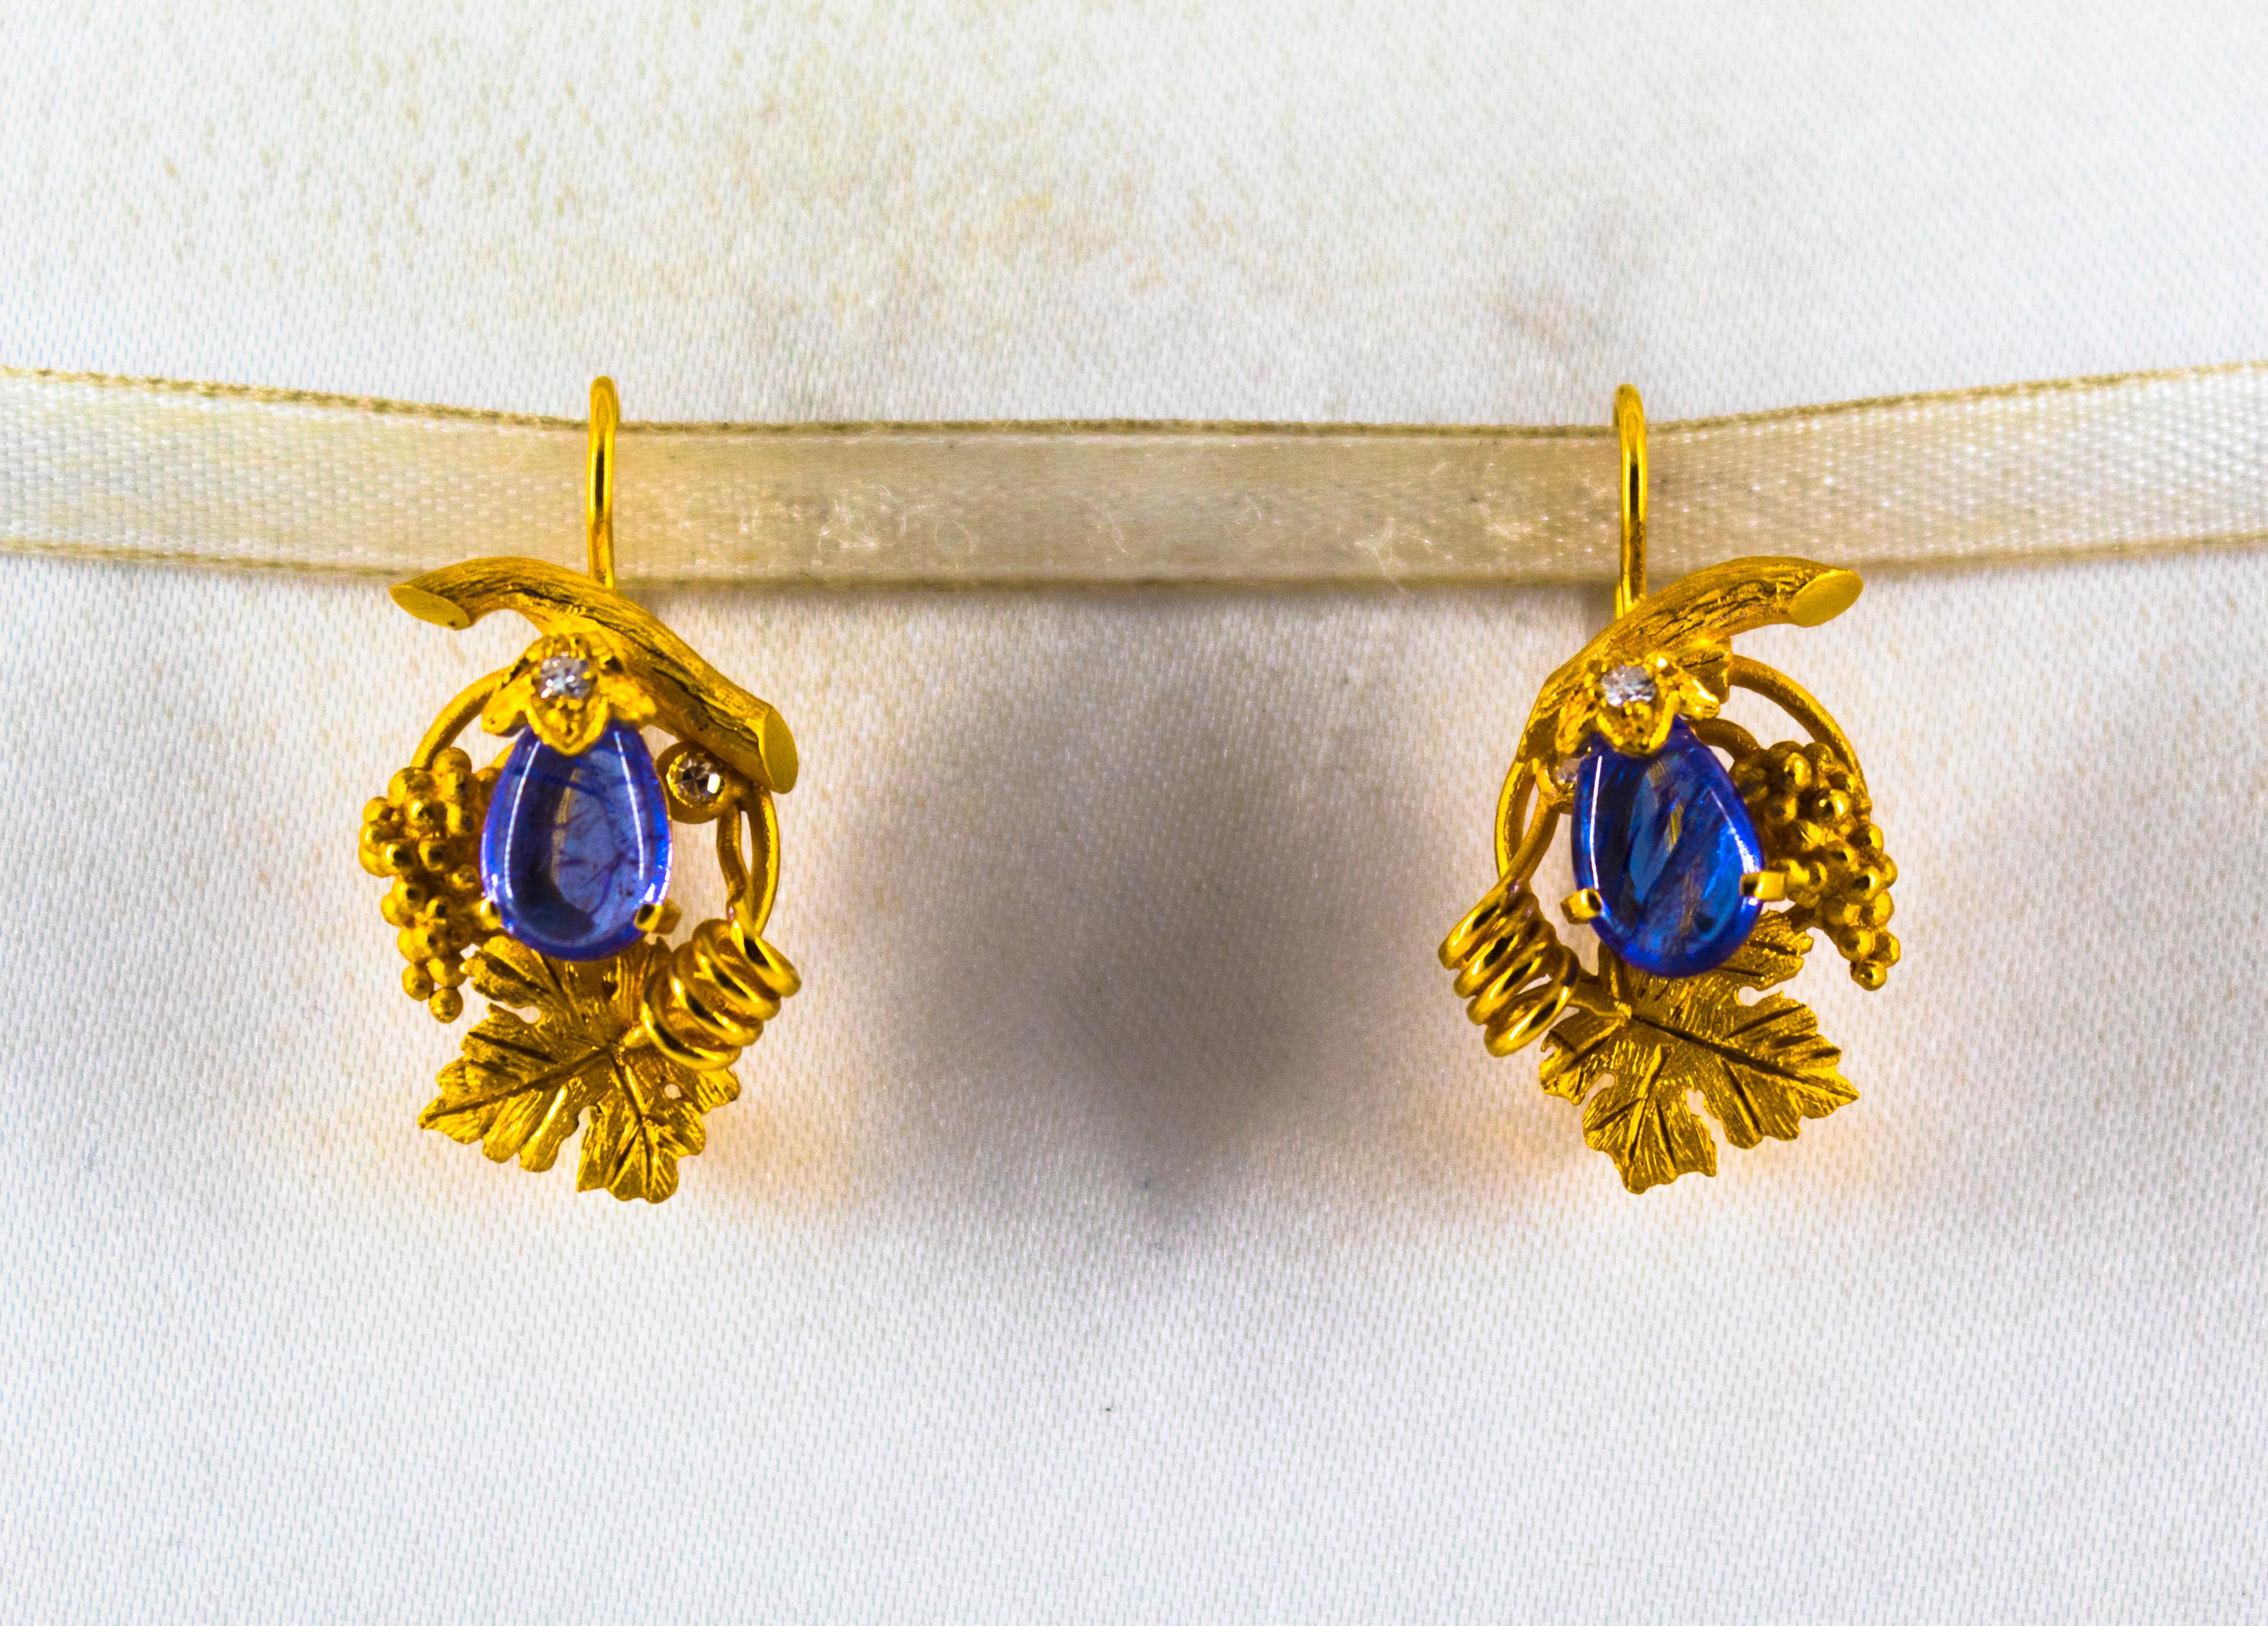 These Earrings are made of 14K Yellow Gold.
These Earrings have 0.12 Carats of White Brilliant Cut Diamonds.
These Earrings have 5.00 Carats of Tanzanite.

These Earrings are available also with Aquamarine.

These Earrings are inspired by Art